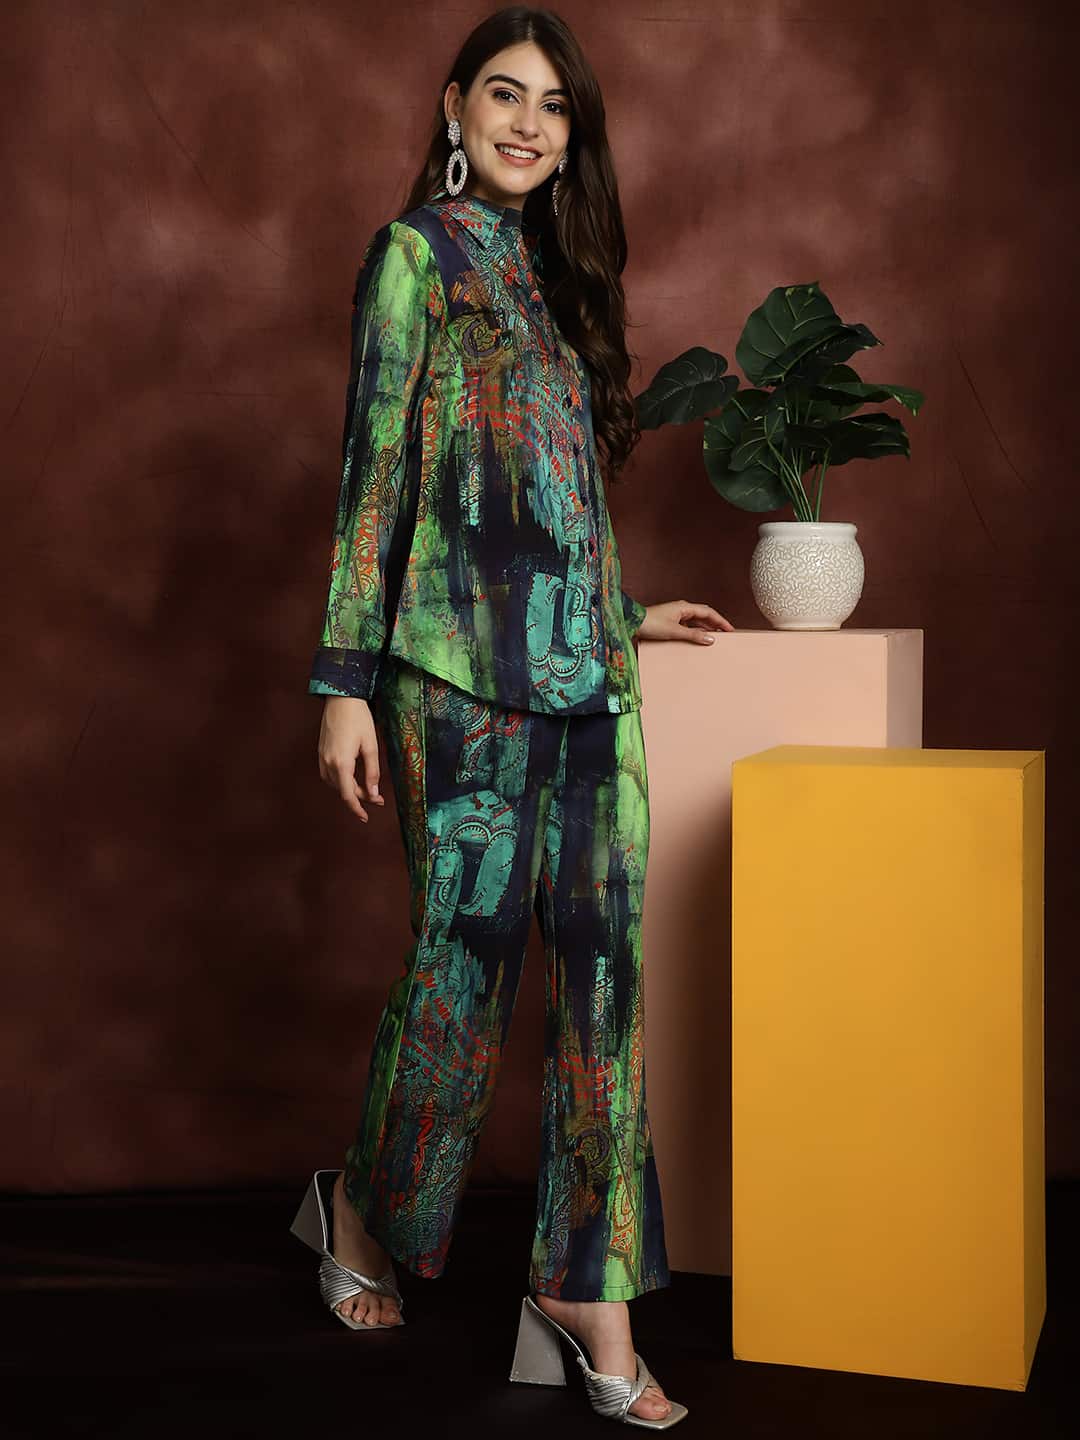 Green Abstract Printed Viscose Rayon Shirt With Trousers Co-ord Set Claura Designs Pvt. Ltd. Cord set Abstract, Co-ord, Co-ord Set, Ethnic, Floral, Green, Rayon, Western